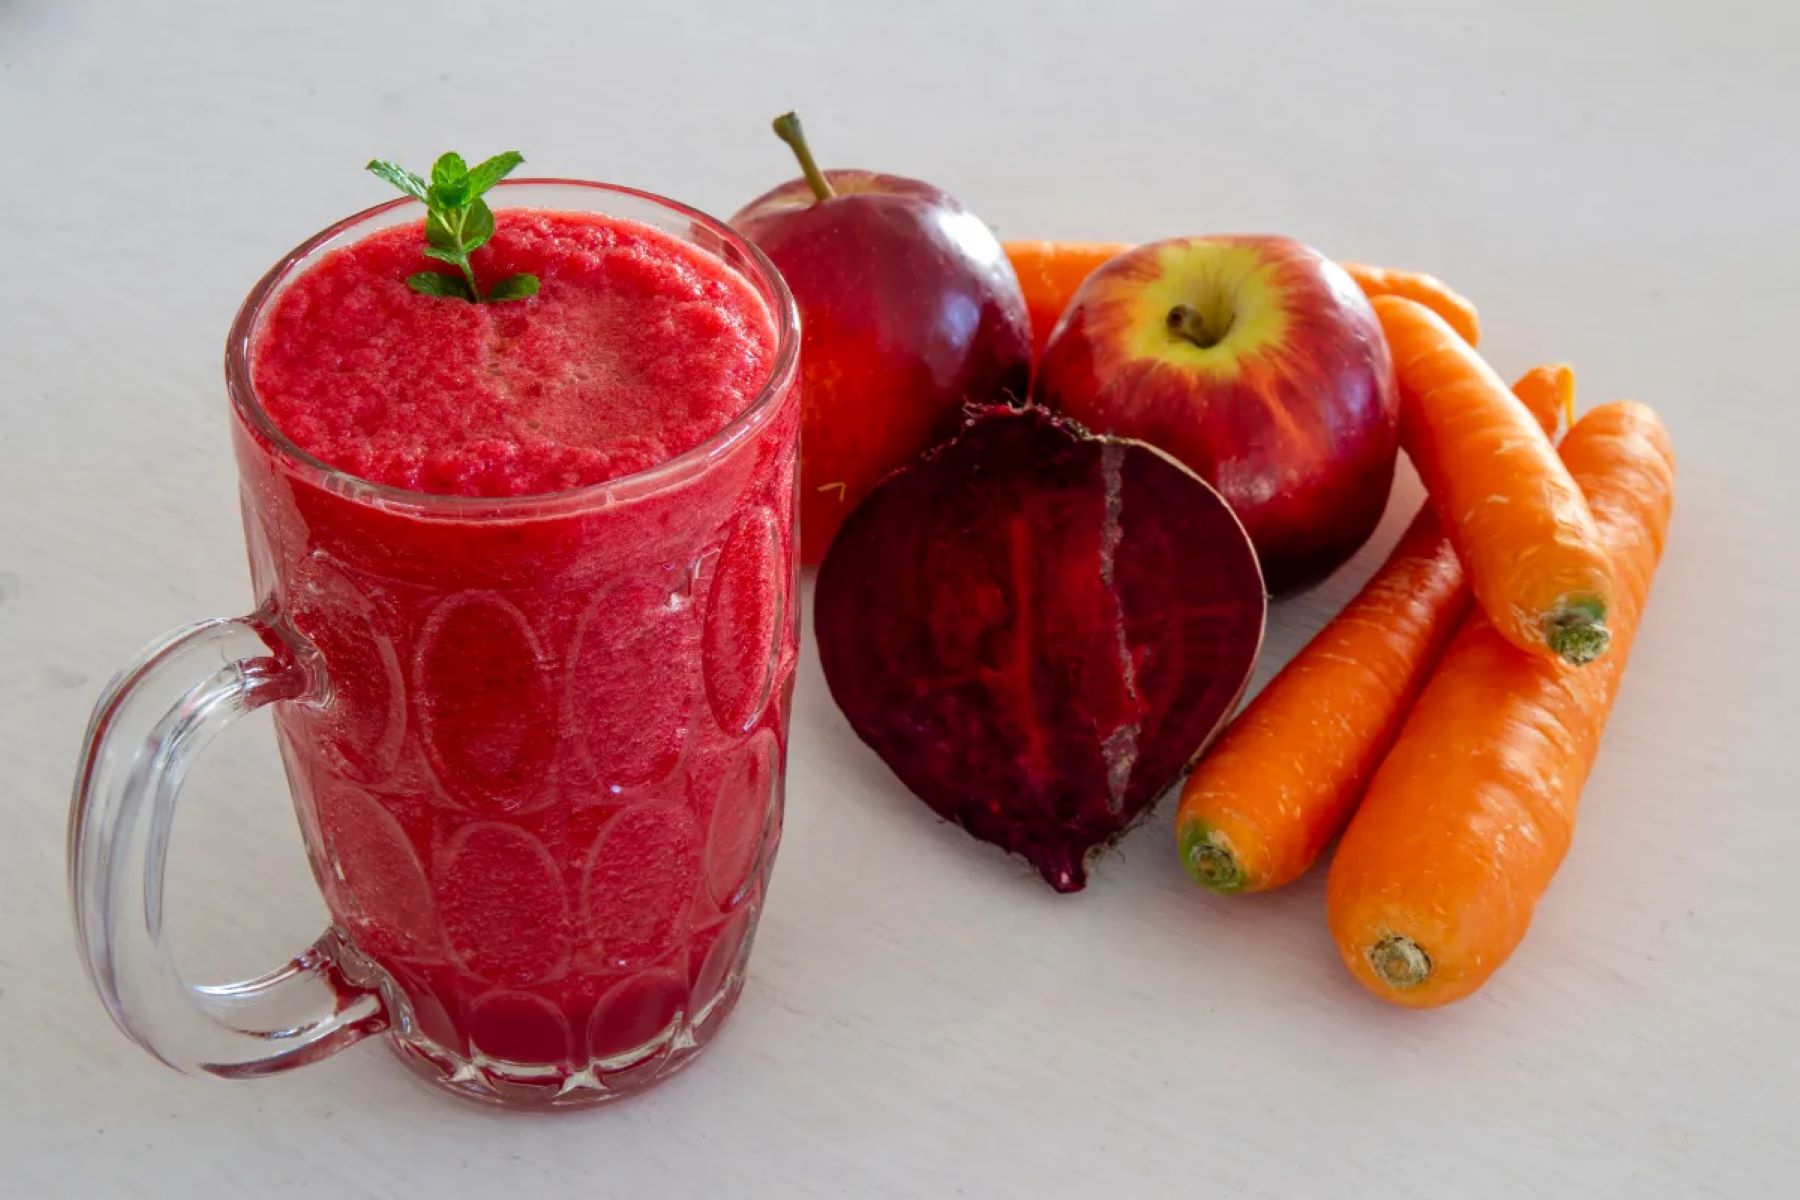 Discover The Surprising Benefits Of Drinking Carrot & Beetroot Juices At Night!